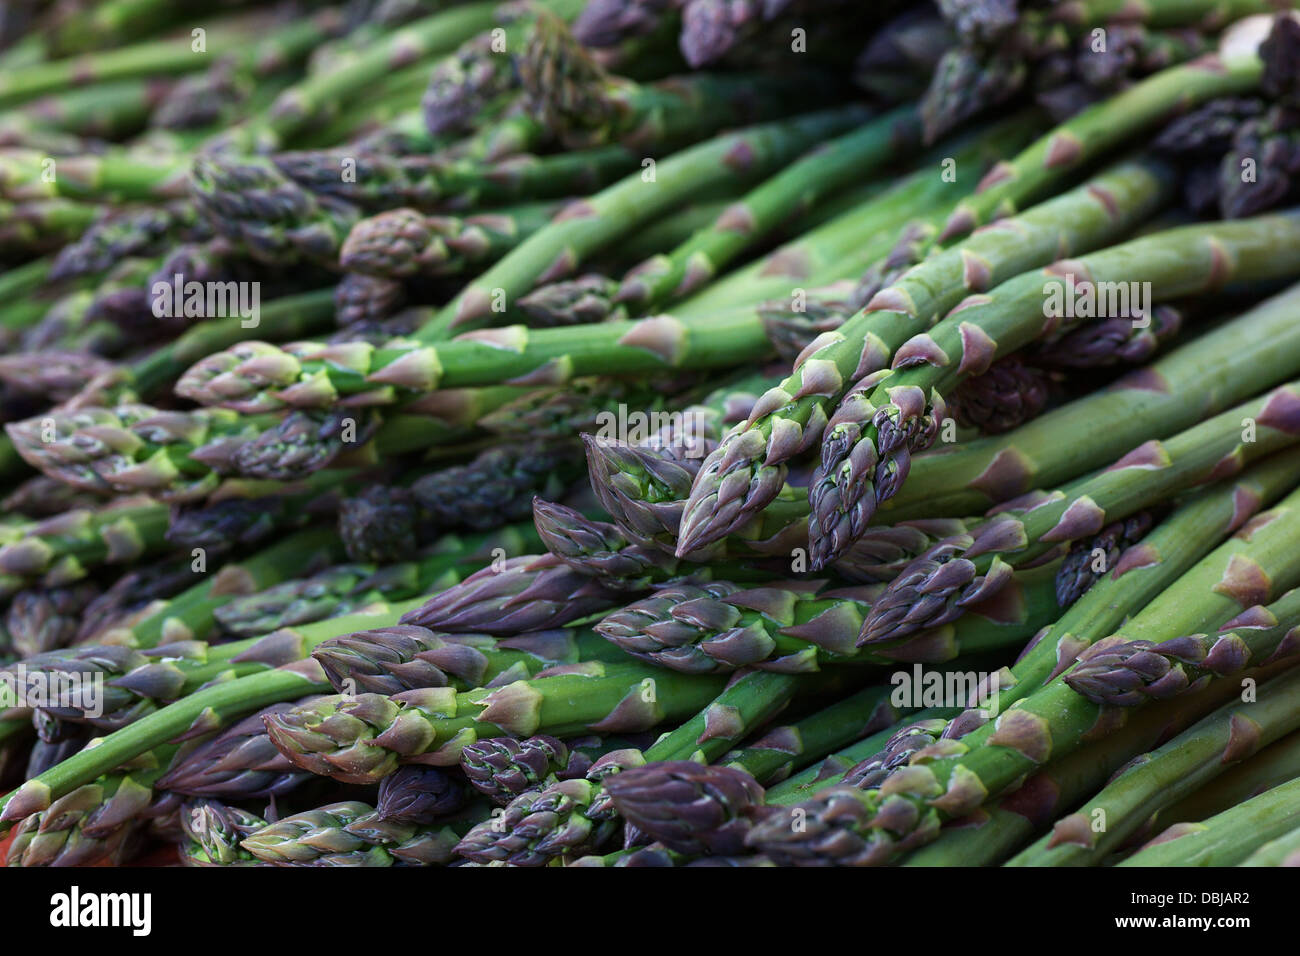 Pile of green Asparagus at the farmers market Stock Photo